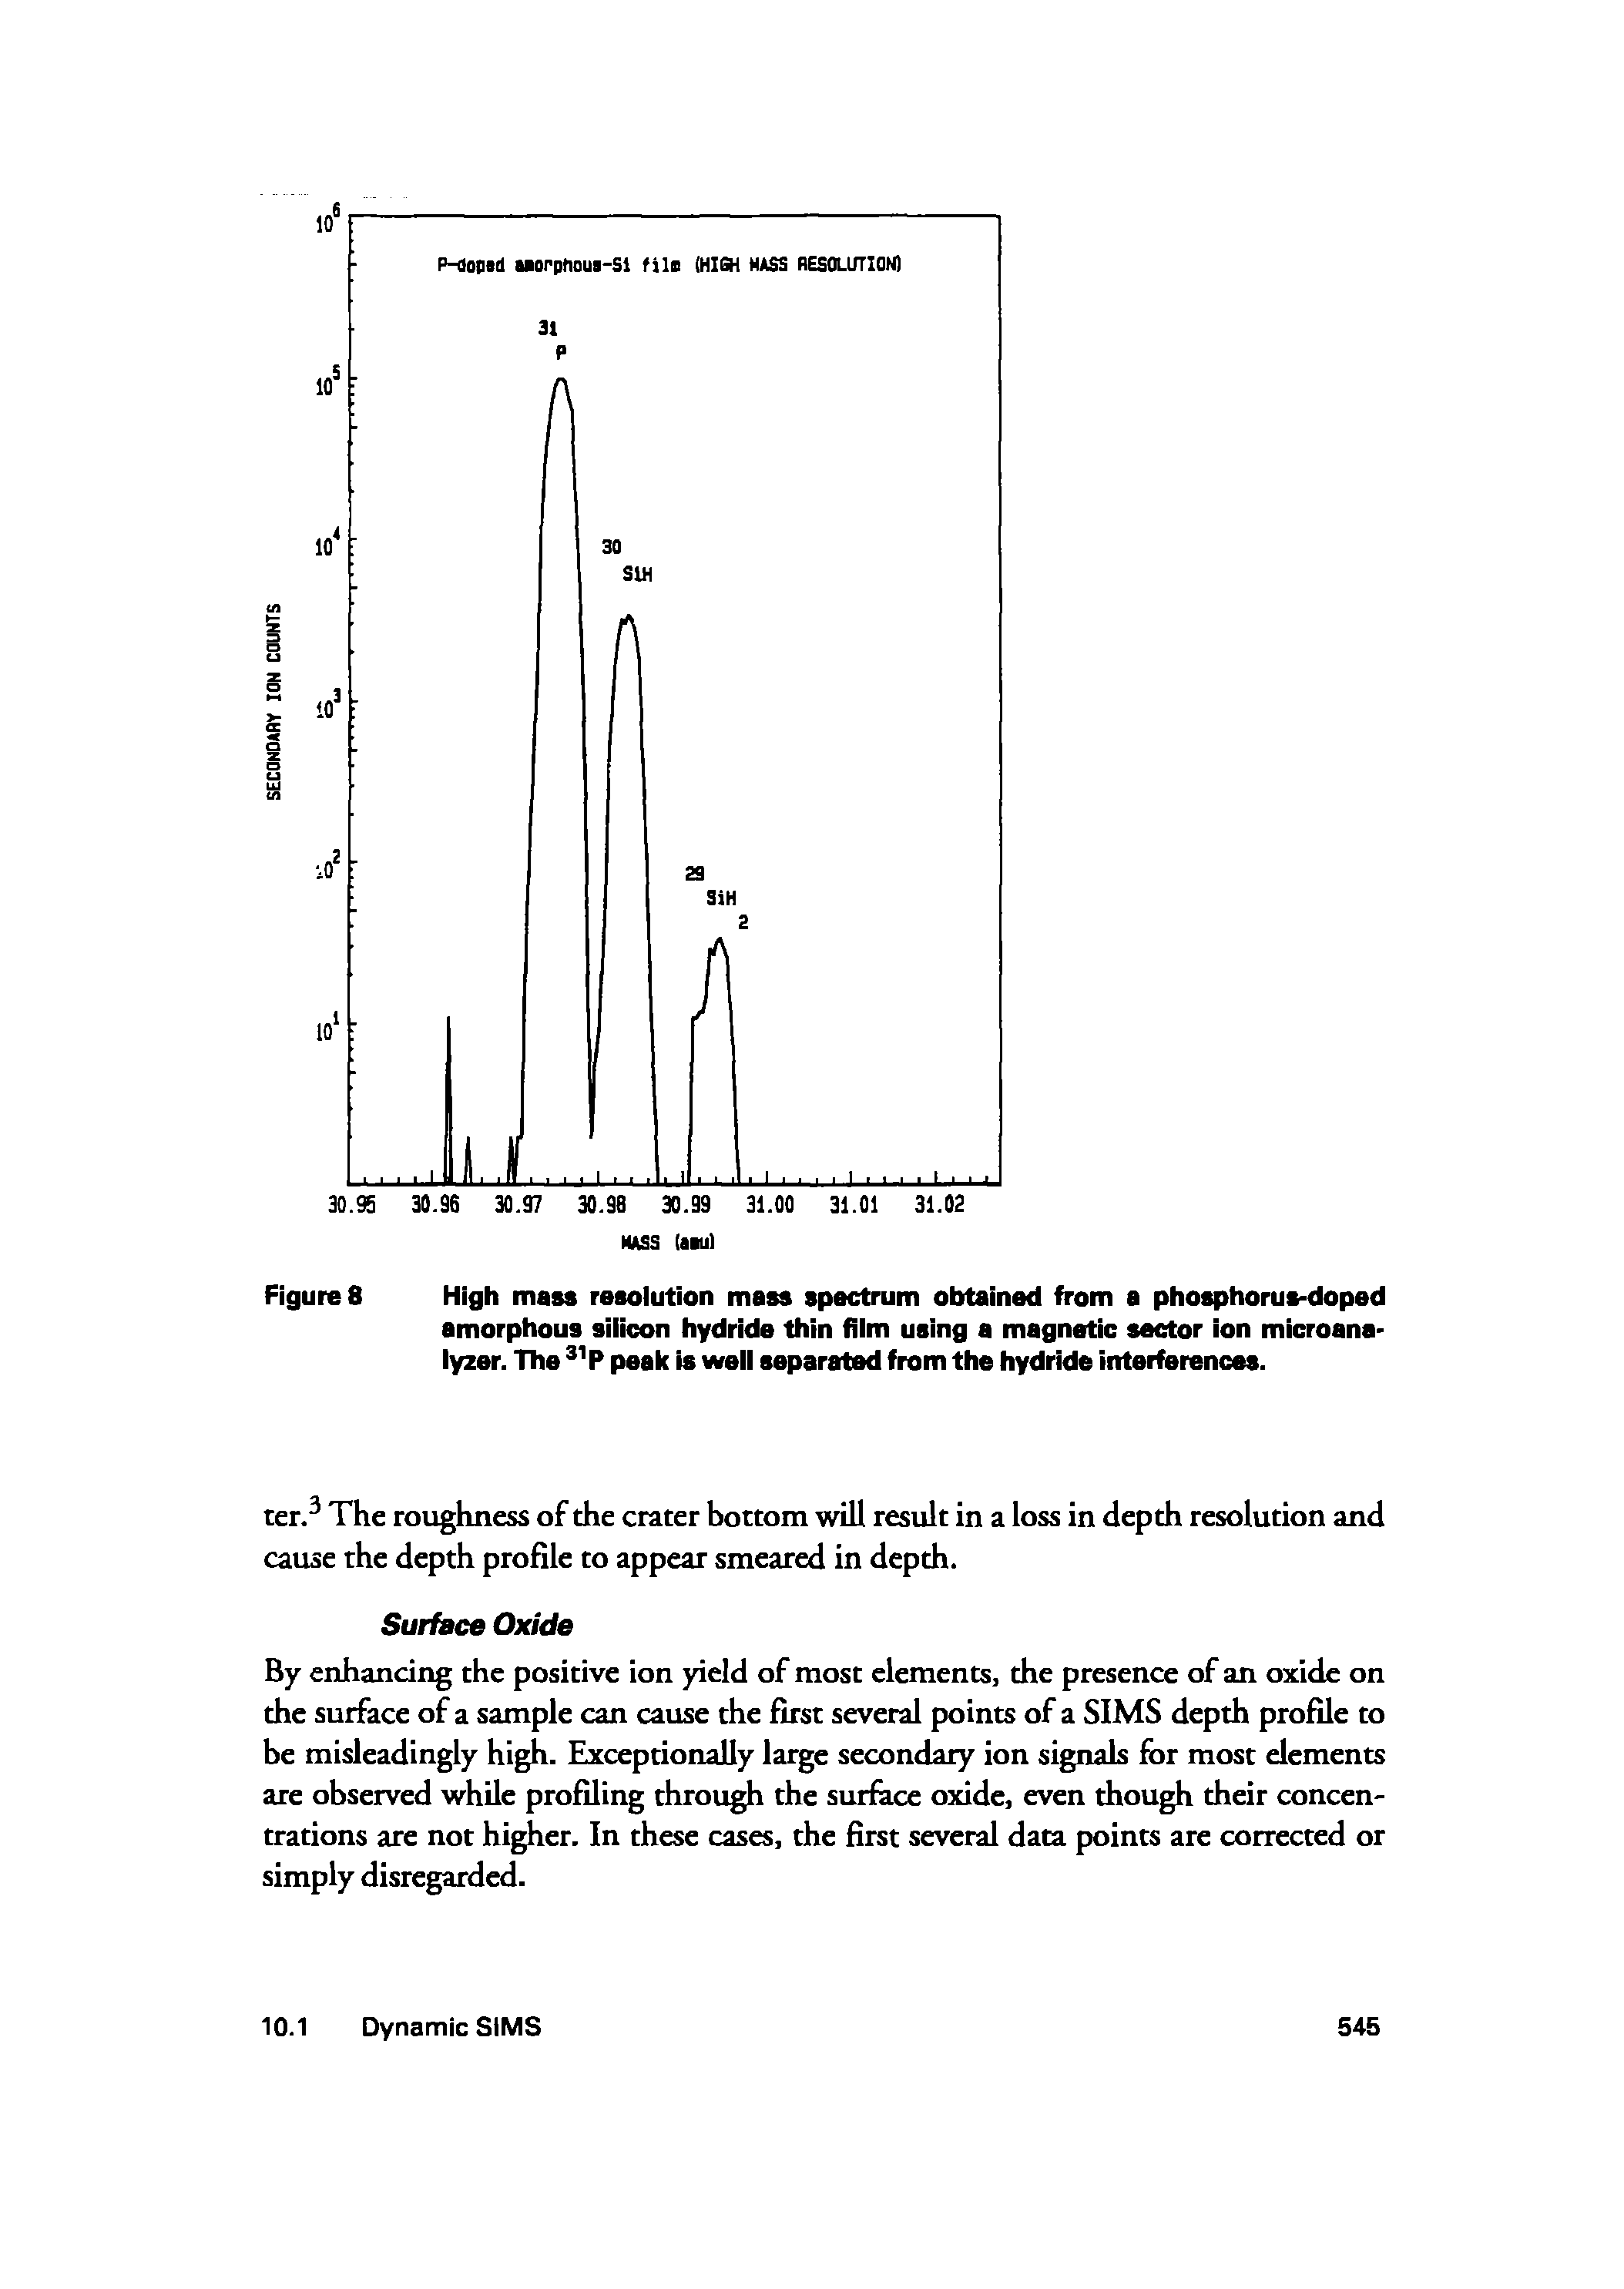 Figures High mass resoiution mass spectrum obtained from a phosphorus-doped amorphous silicon hydride thin film using a magnetic sector ion microanalyzer. The peak is well separated from the hydride iirterferences.